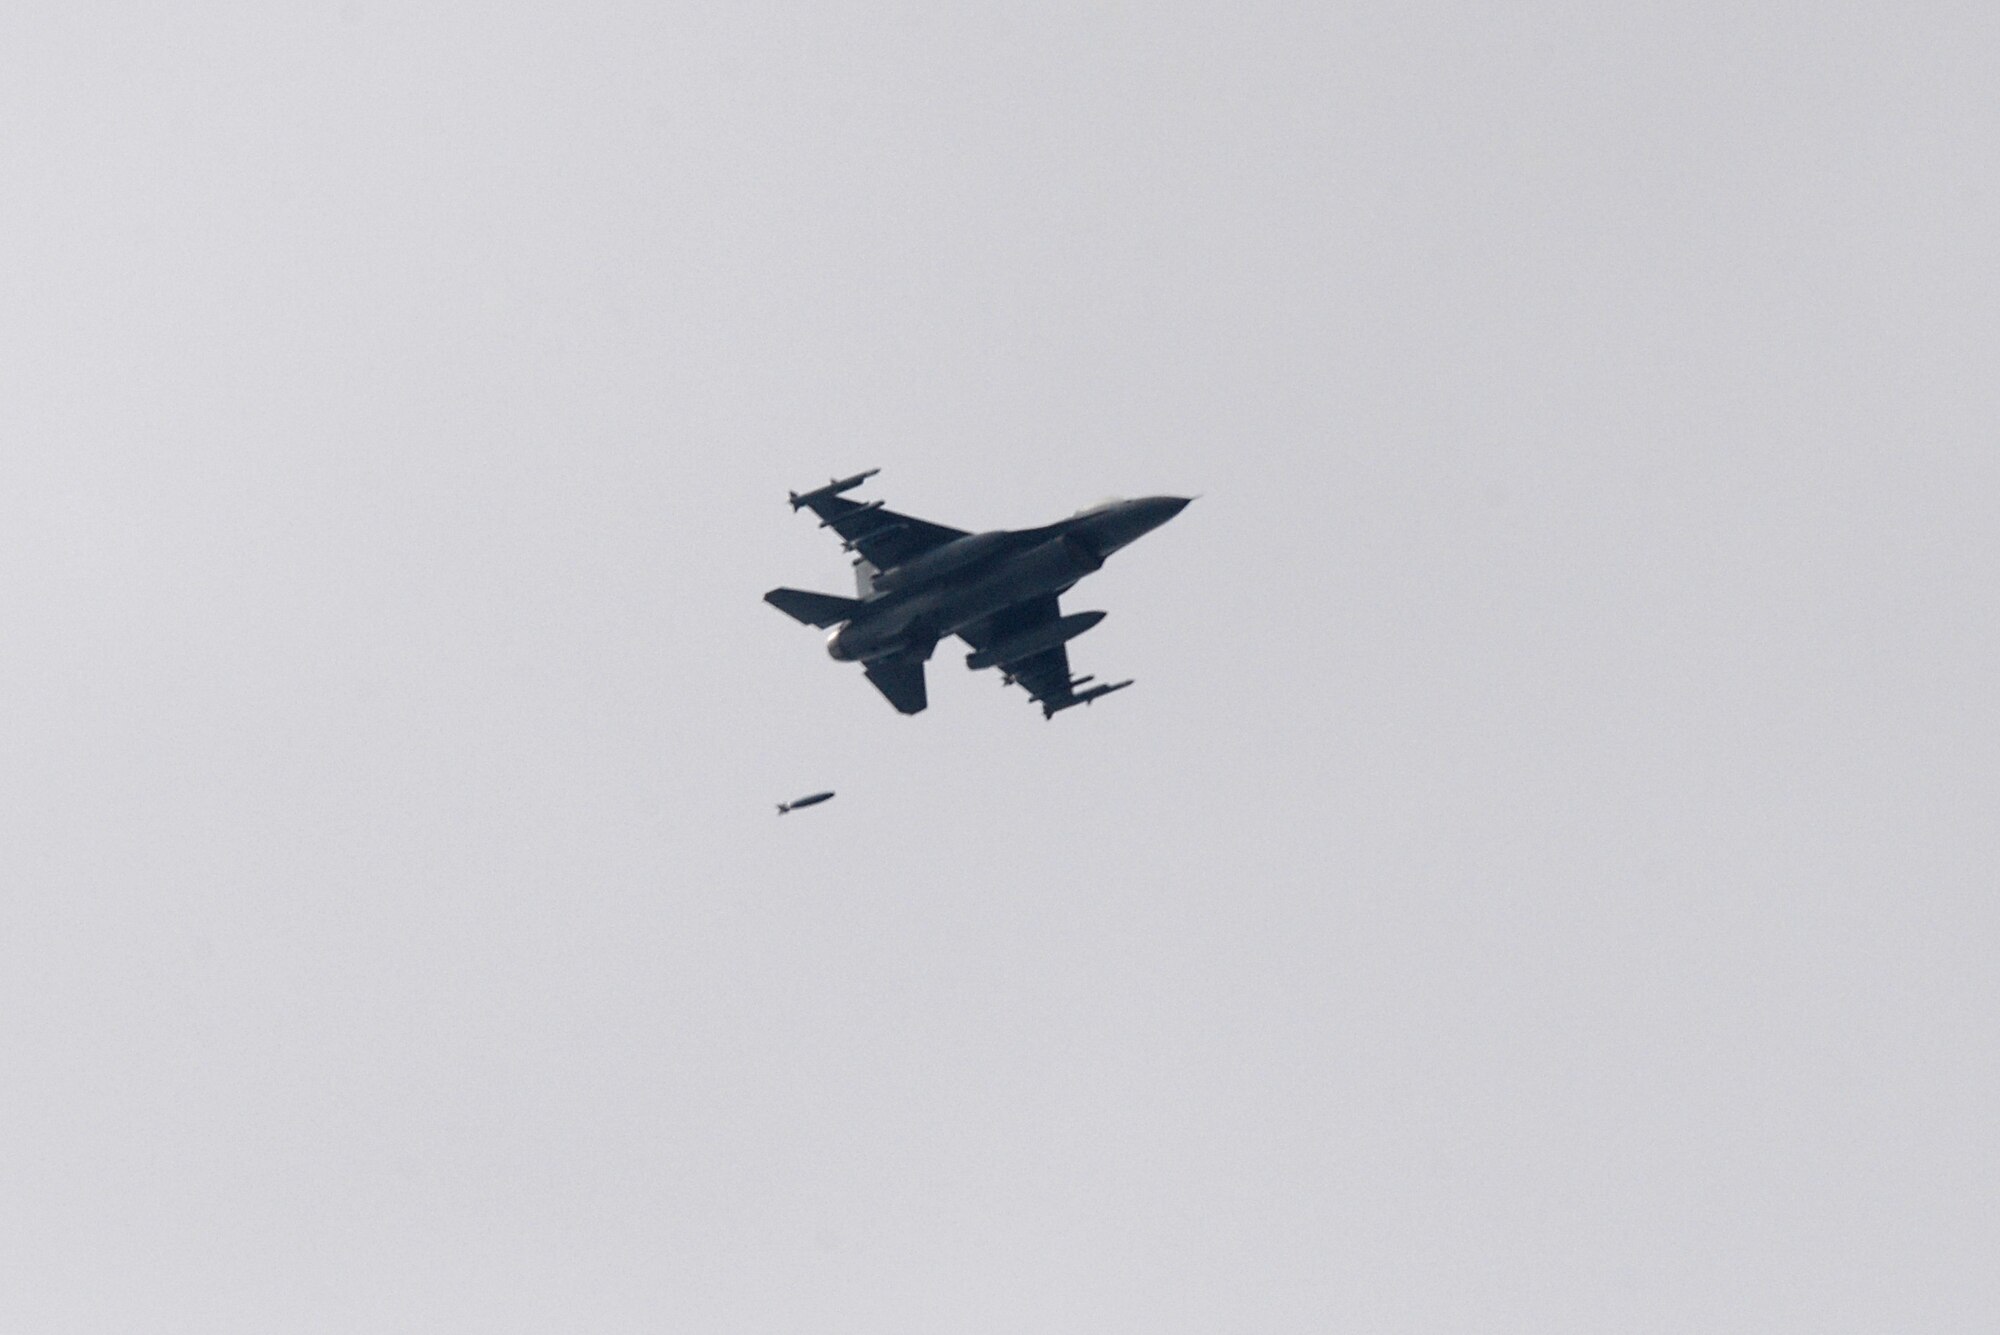 A picture of a 177th Fighter Wing U.S. Air Force F-16C Fighting Falcon dropping a 500 lb. inert BDU-50 practice bomb at the Warren Grove Bombing Range in Ocean County, N.J.